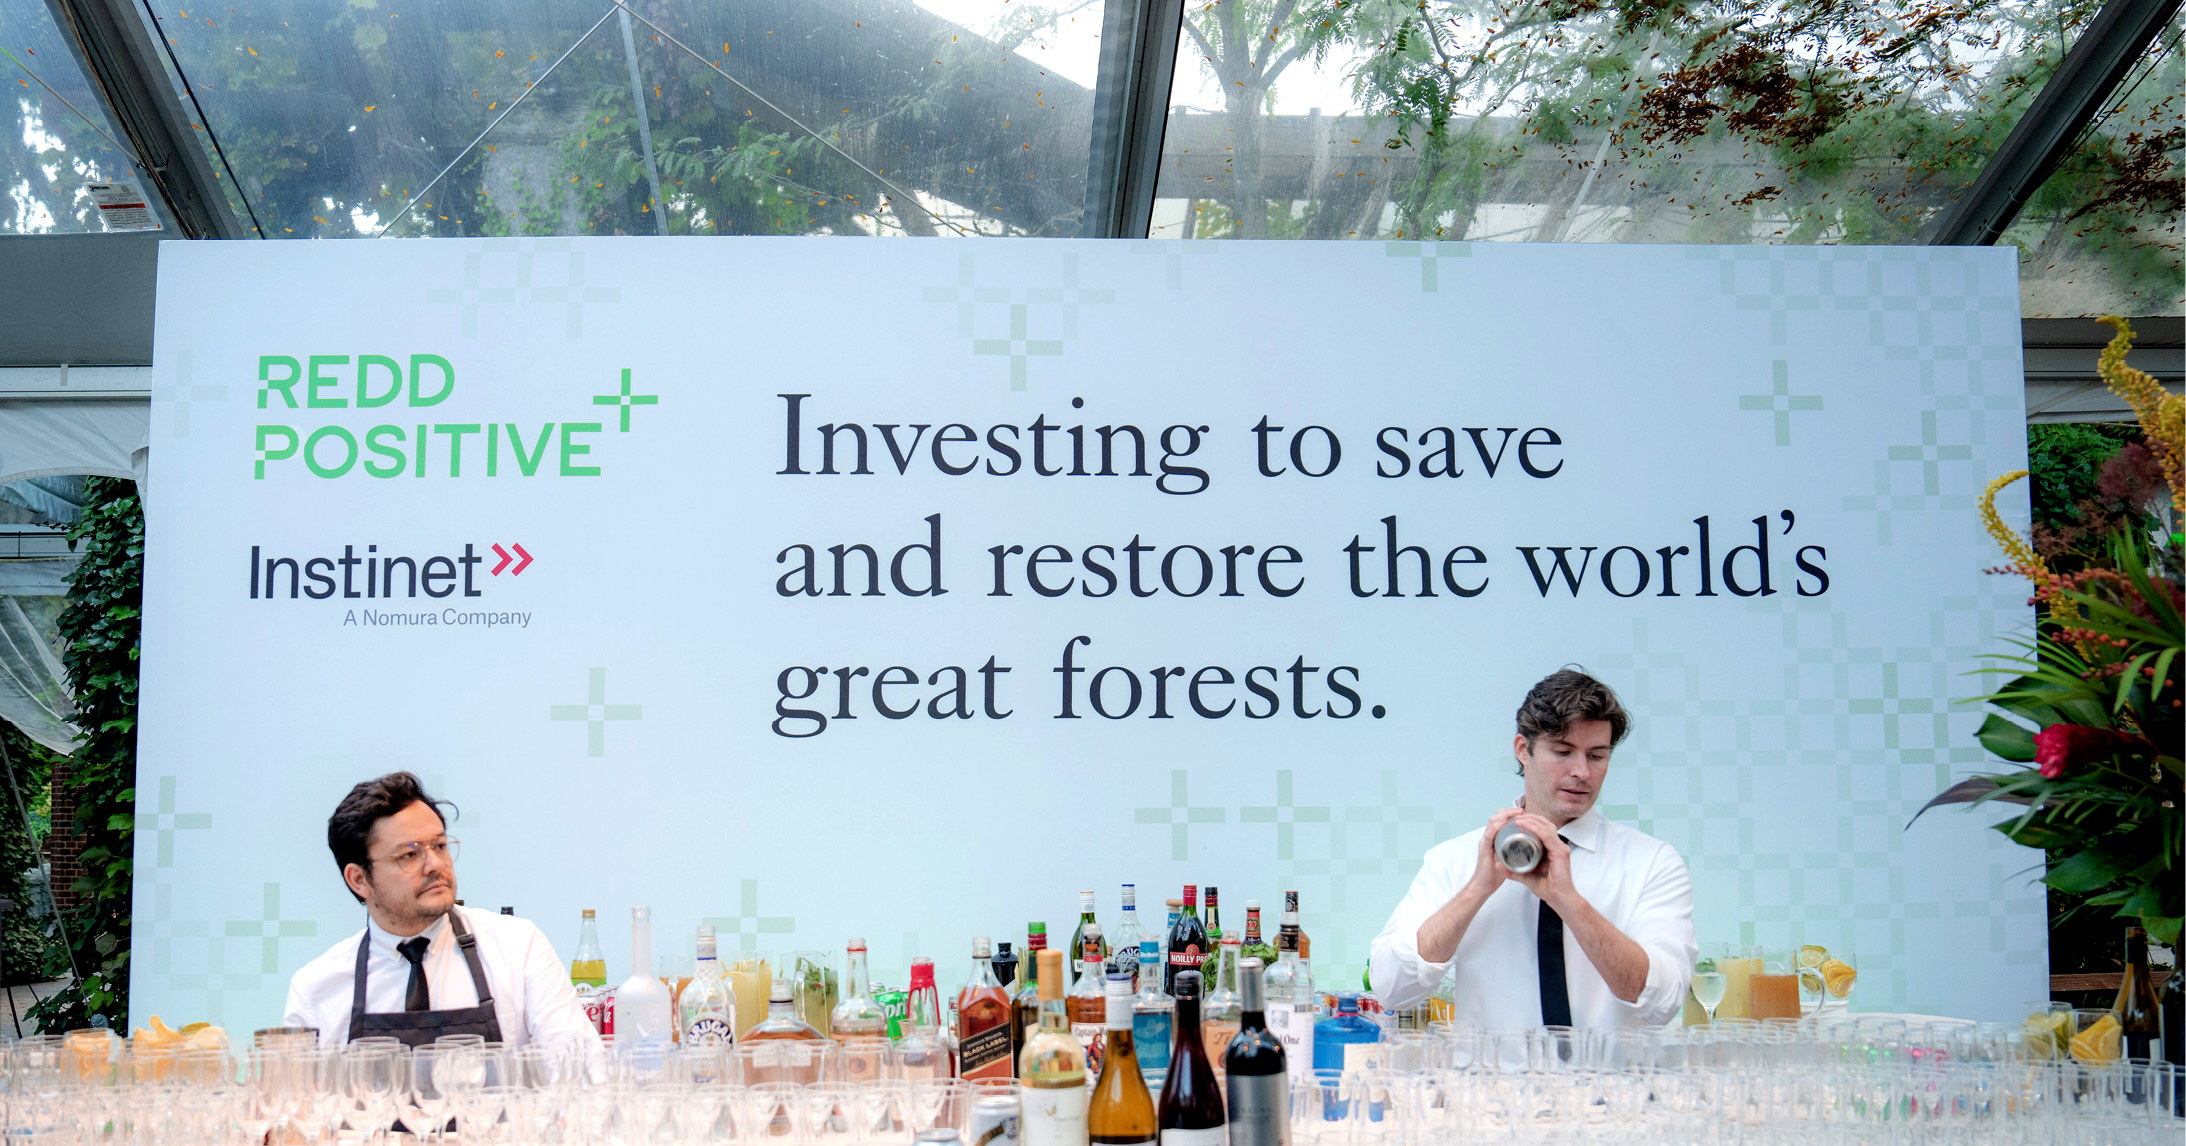 Two Redd Positive Cocktails and Conservation launch event food and drink servers in front of a large banner featuring the Redd Positive and Instinet logos with a large headline that reads, Investing to save and restore the world’s great forests. 